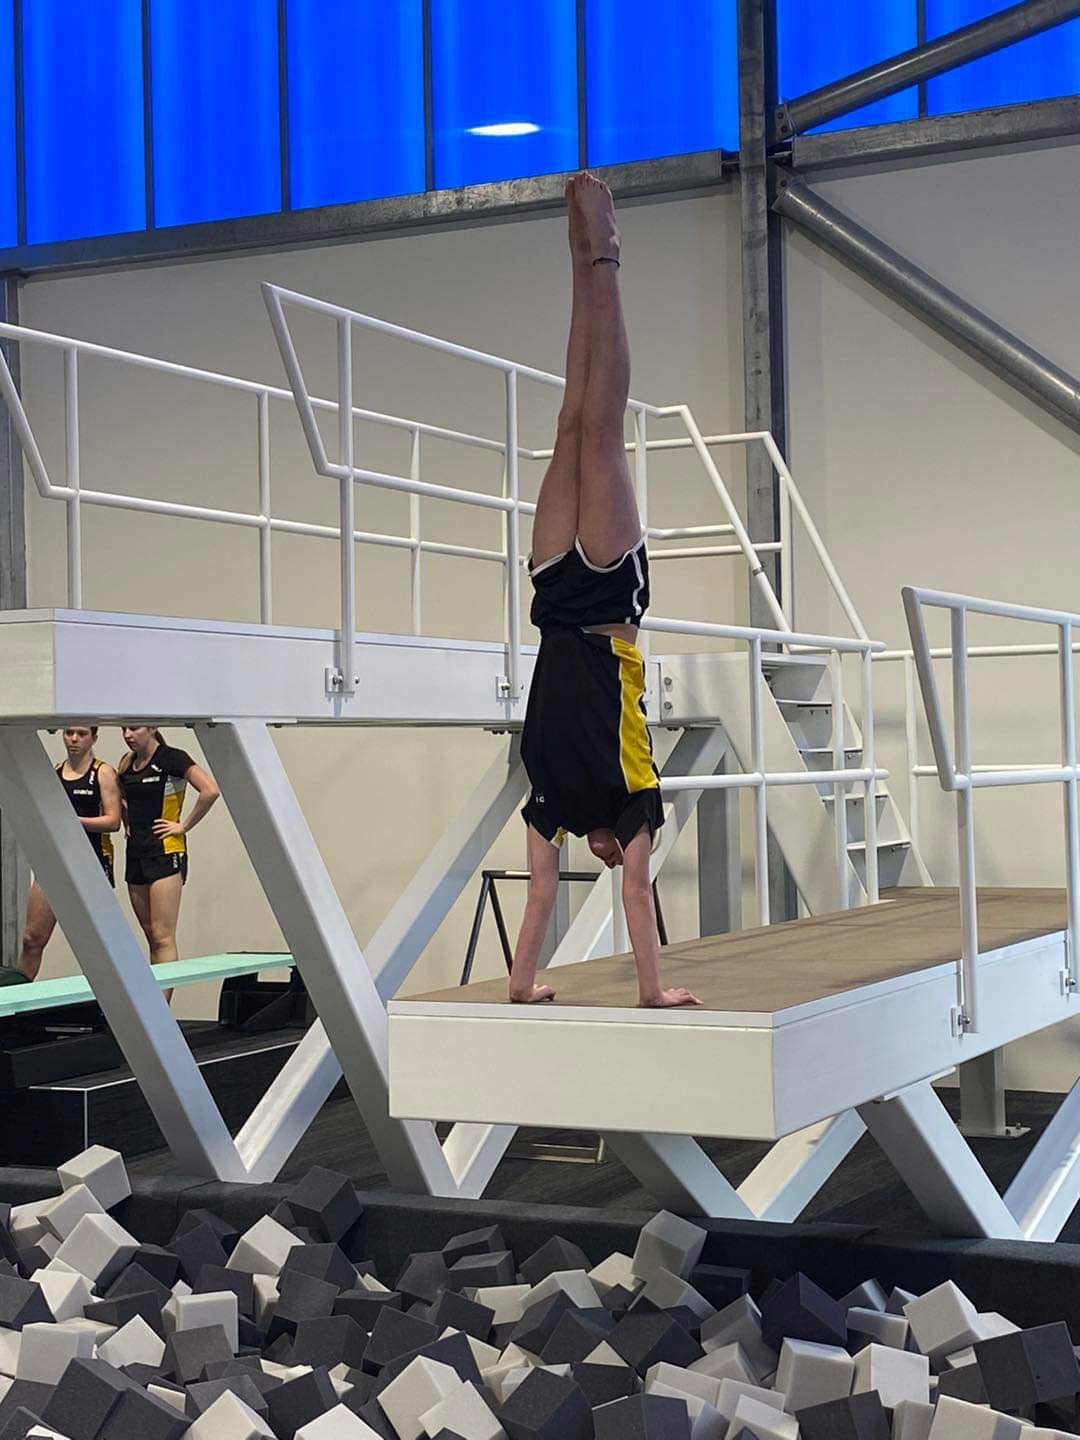 A diver practising their technique, doing an handstand on a platform with a pit of foam blocks below. 